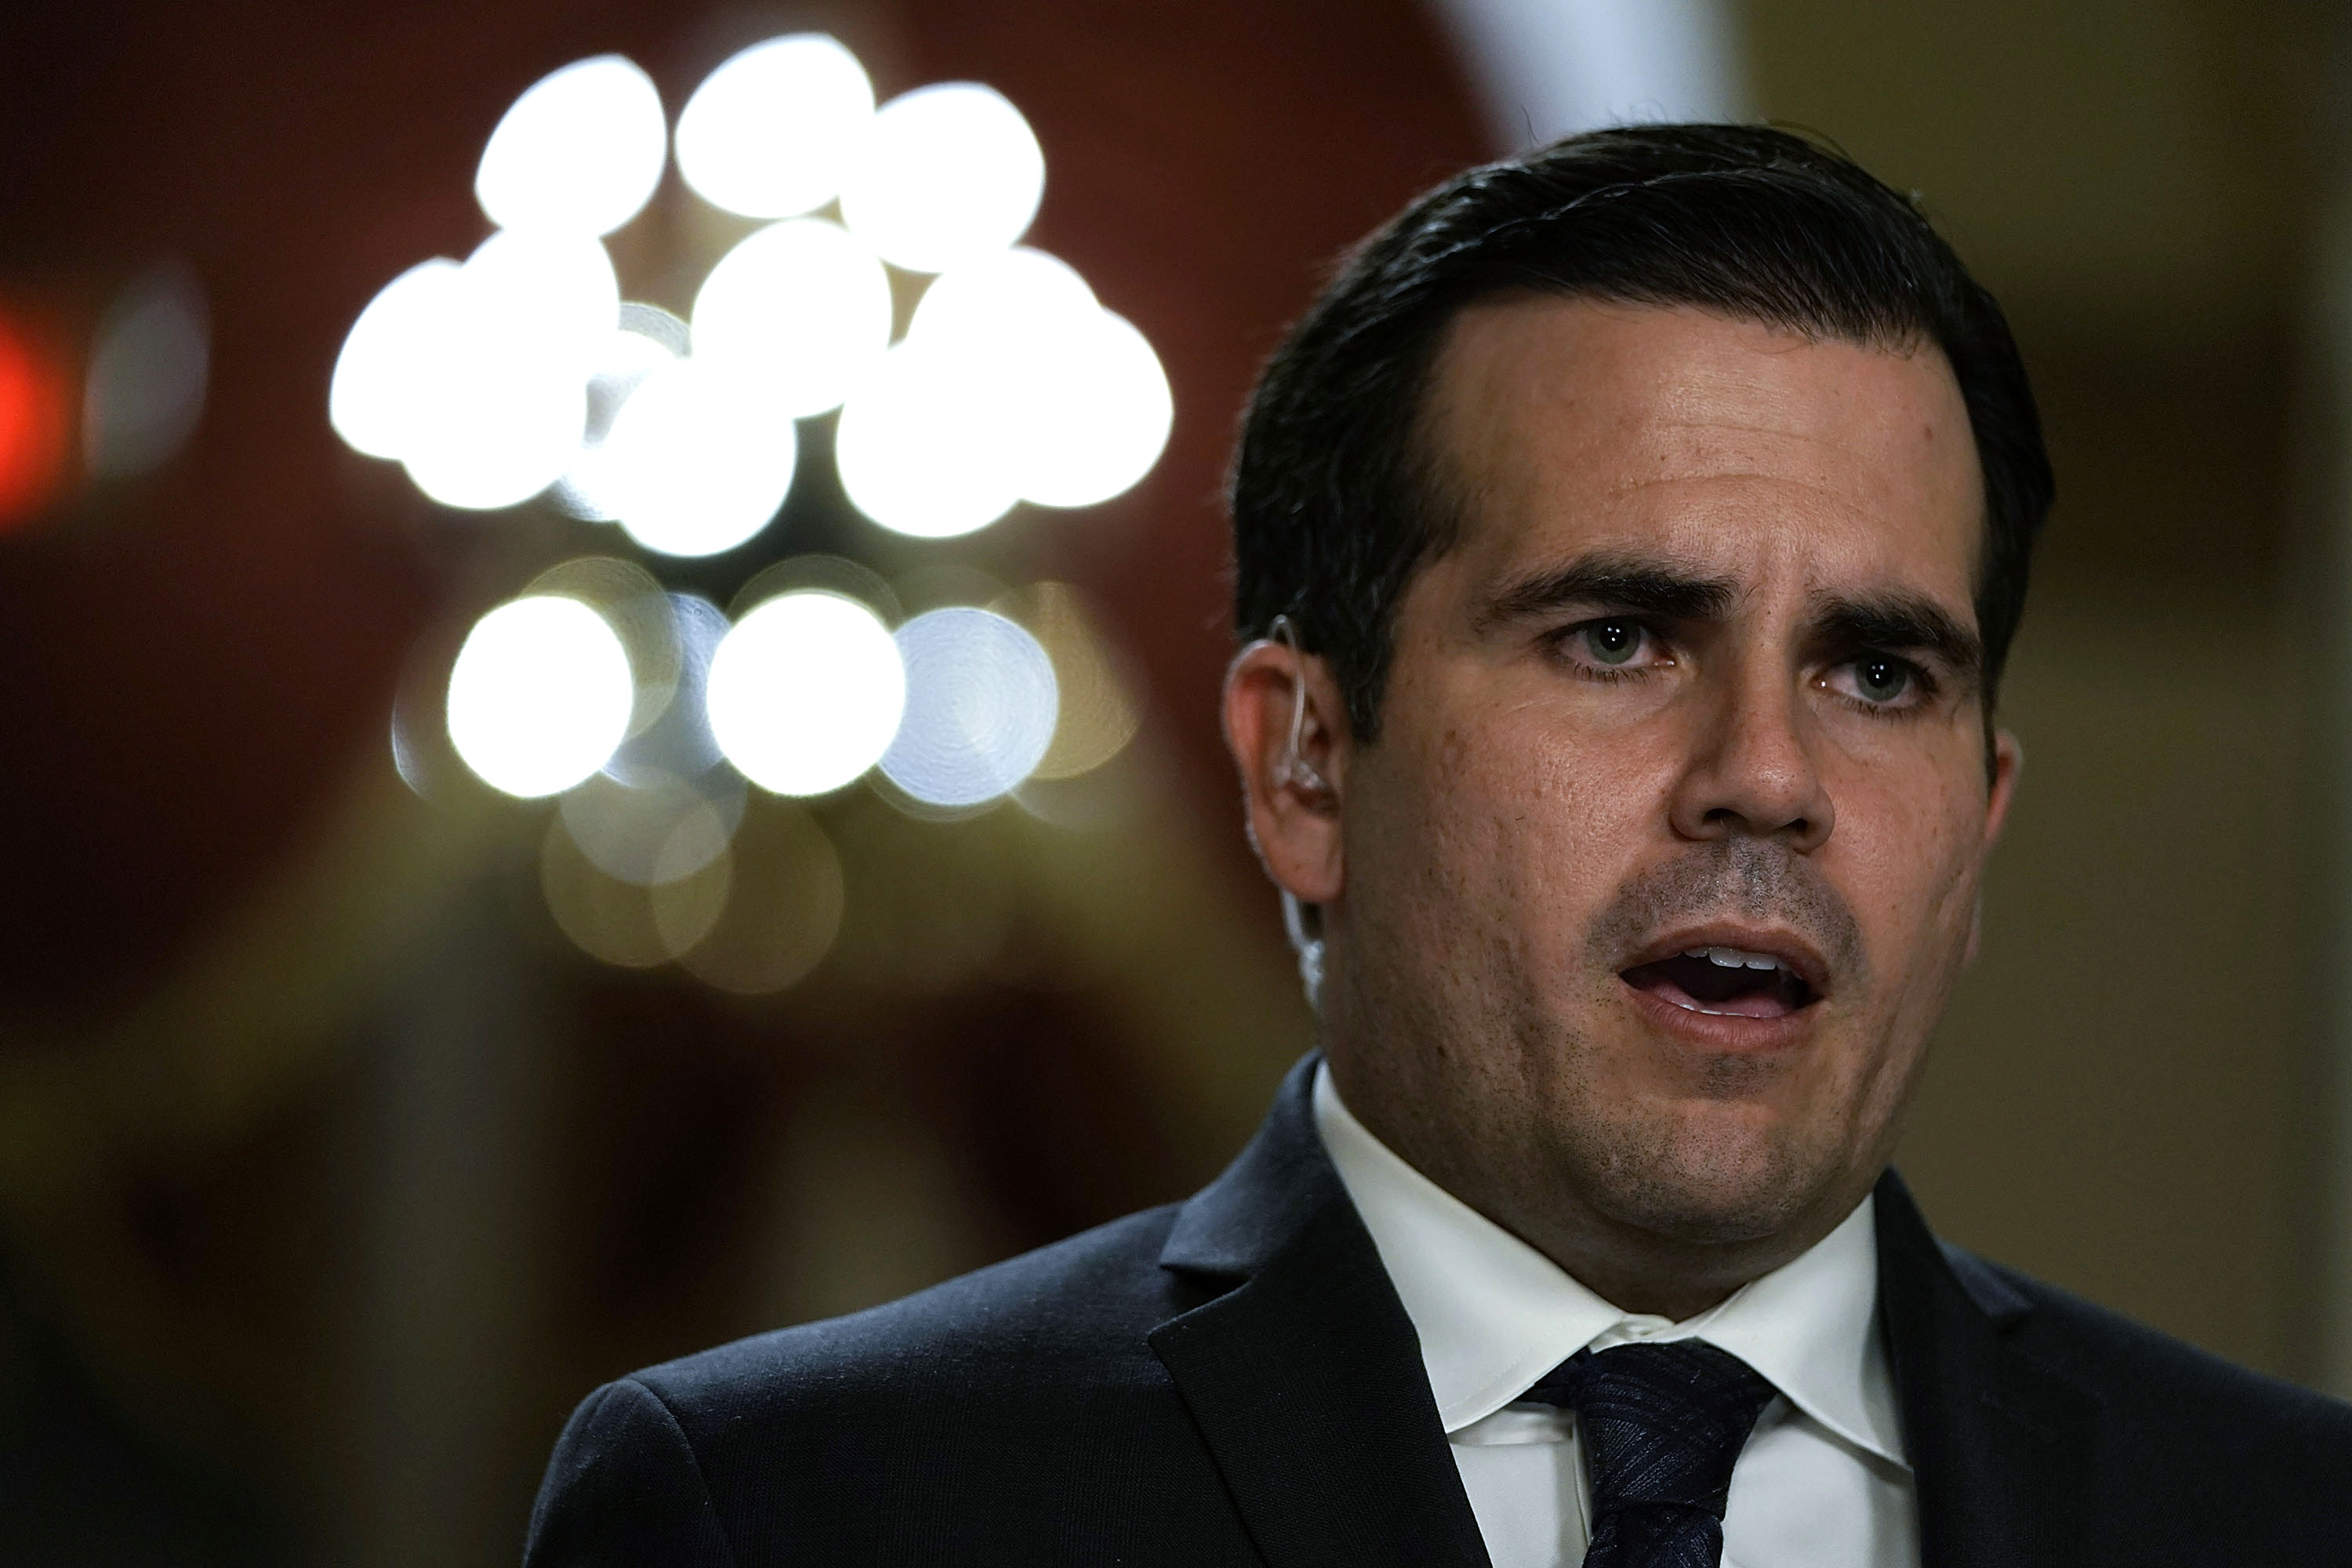 Puerto Rican Gov. Ricardo Rossello is interviewed by a TV channel after a House vote at the Capitol December 21, 2017 in Washington, DC. The House has passed a $81 billion emergency aid bill to help Texas, Florida, Puerto Rico and California  to rebuild after natural disasters this year. (Alex Wong&mdash;Getty Images)